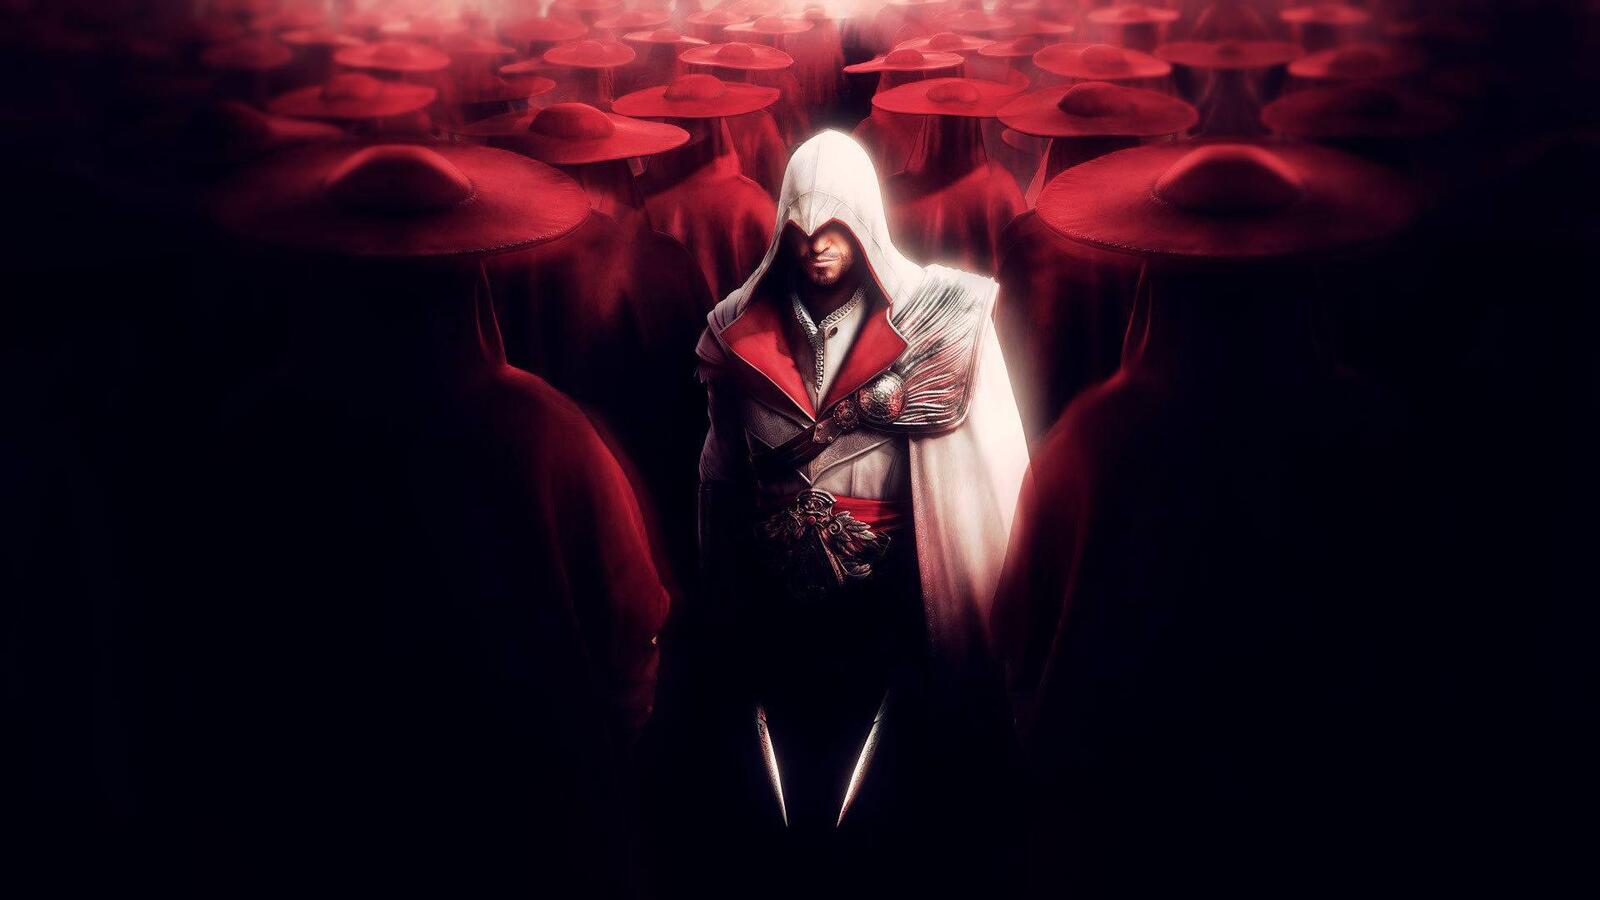 Wallpapers Assassin Creed game character on the desktop